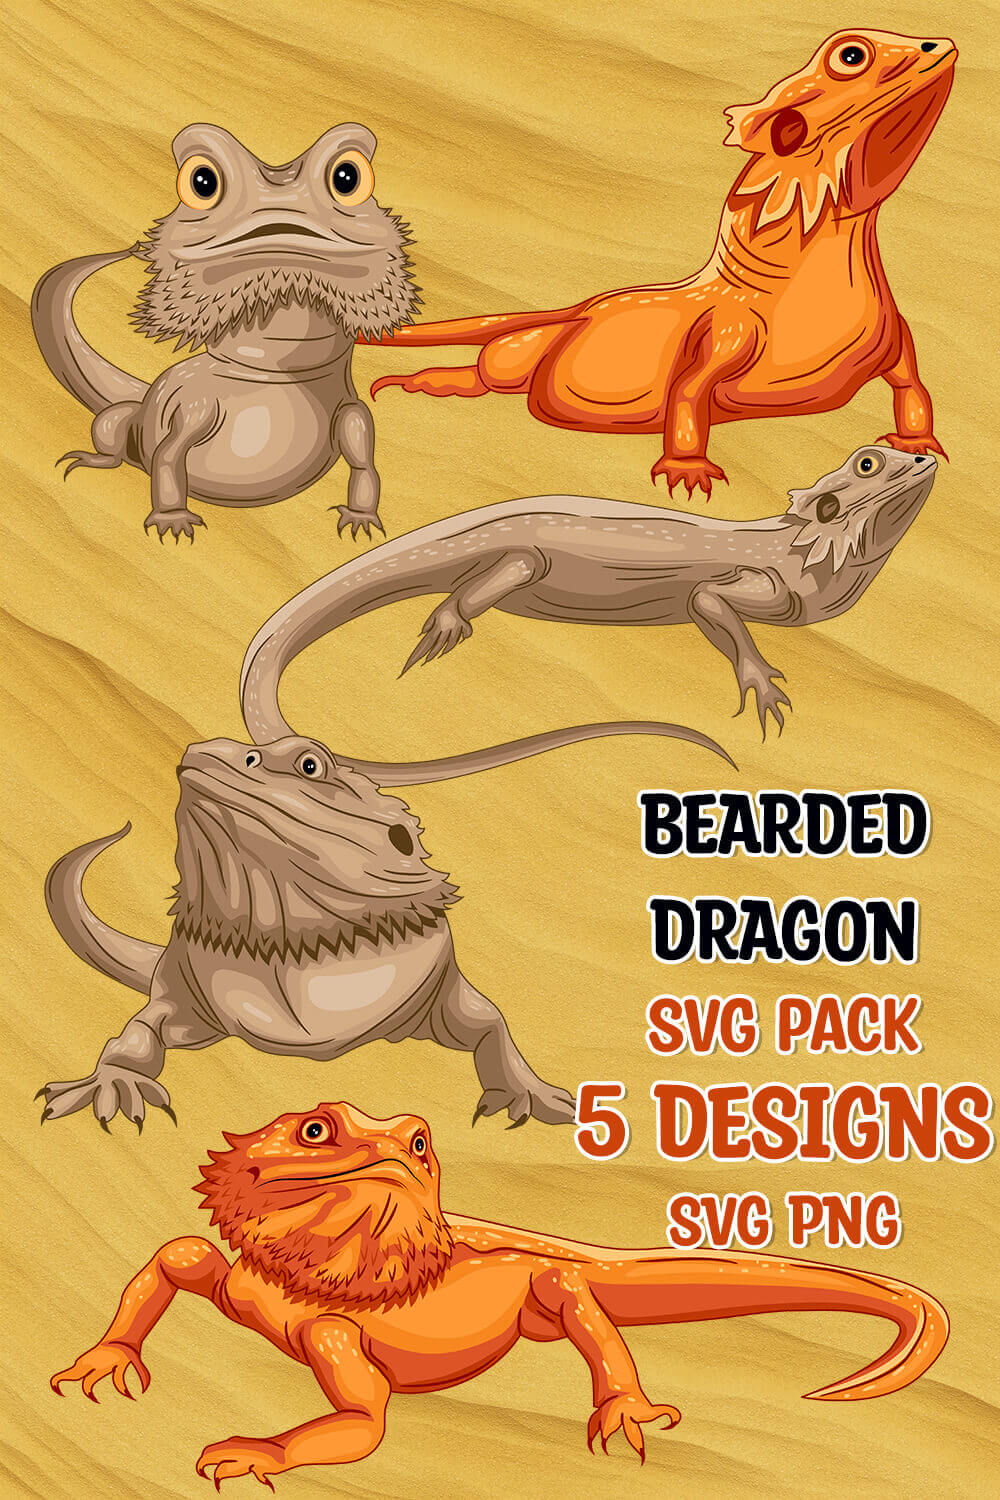 Bearded dragon SVG in orange and sand.